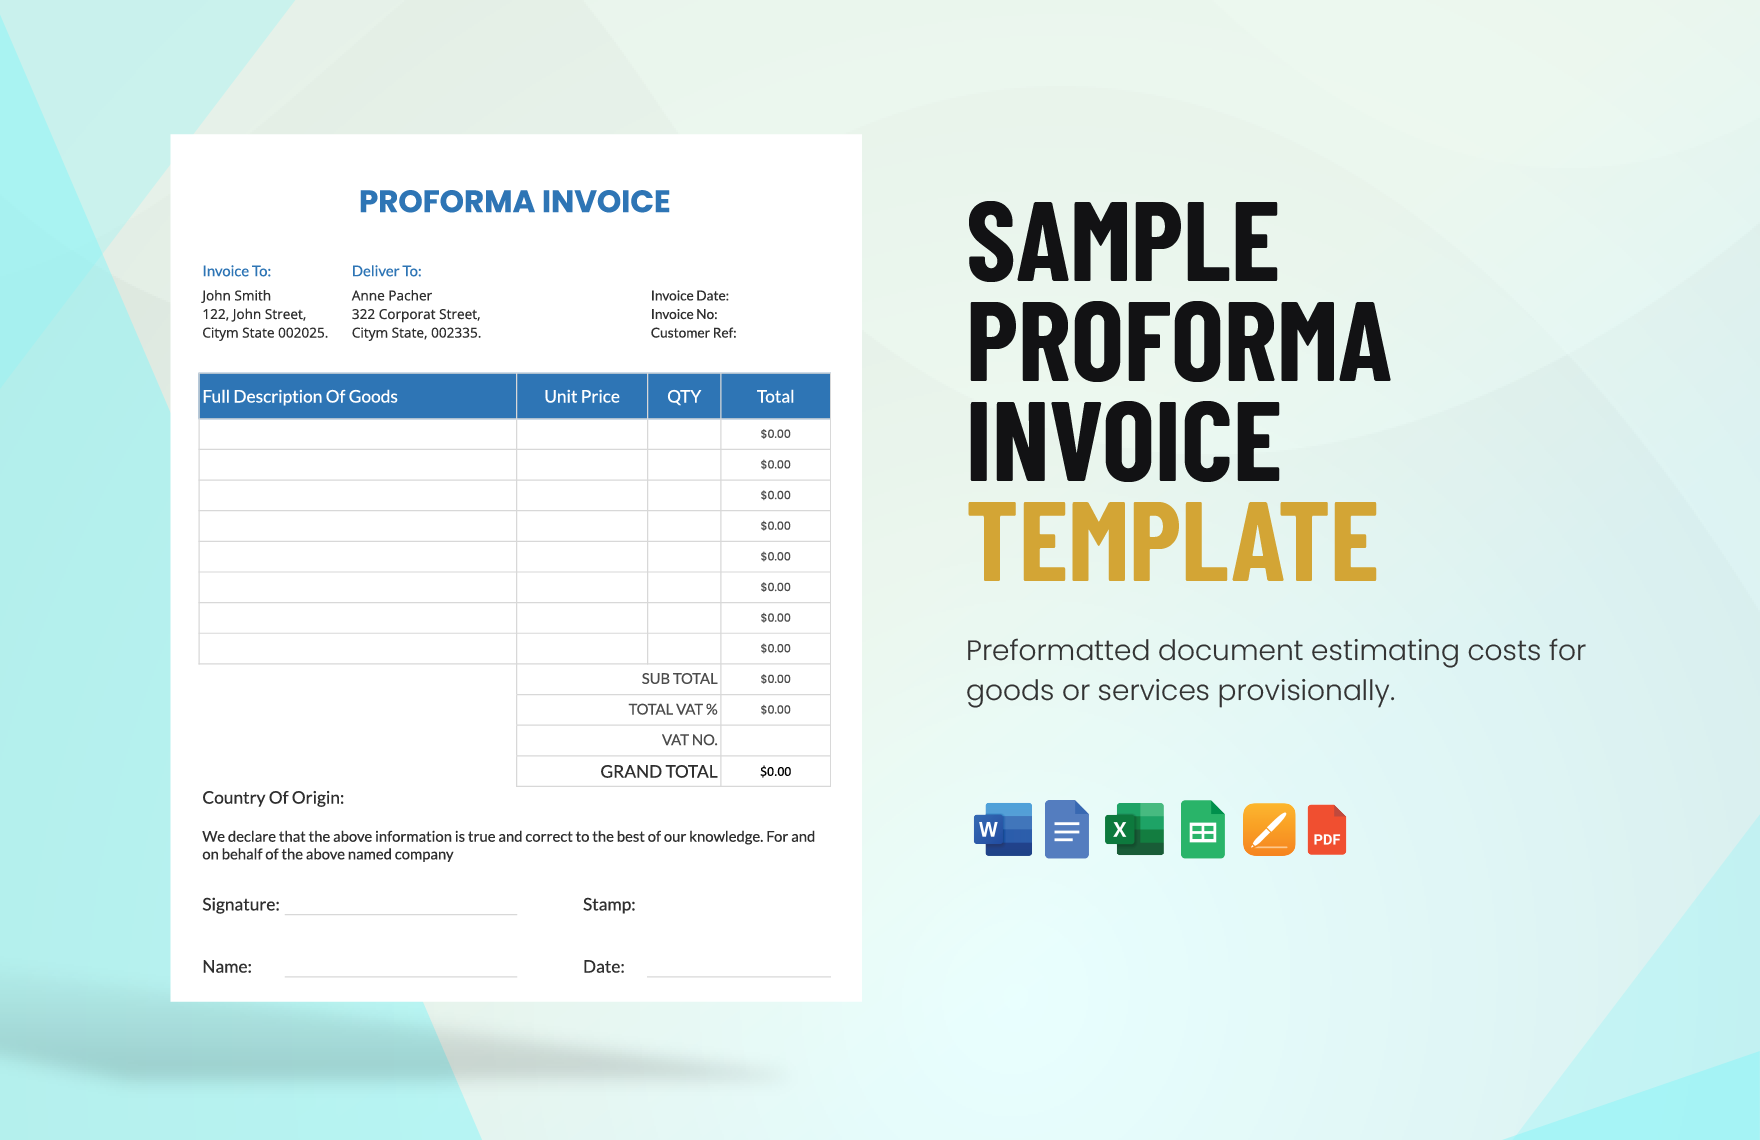 Sample Proforma Invoice Template in Word, Google Docs, Excel, PDF, Google Sheets, Apple Pages